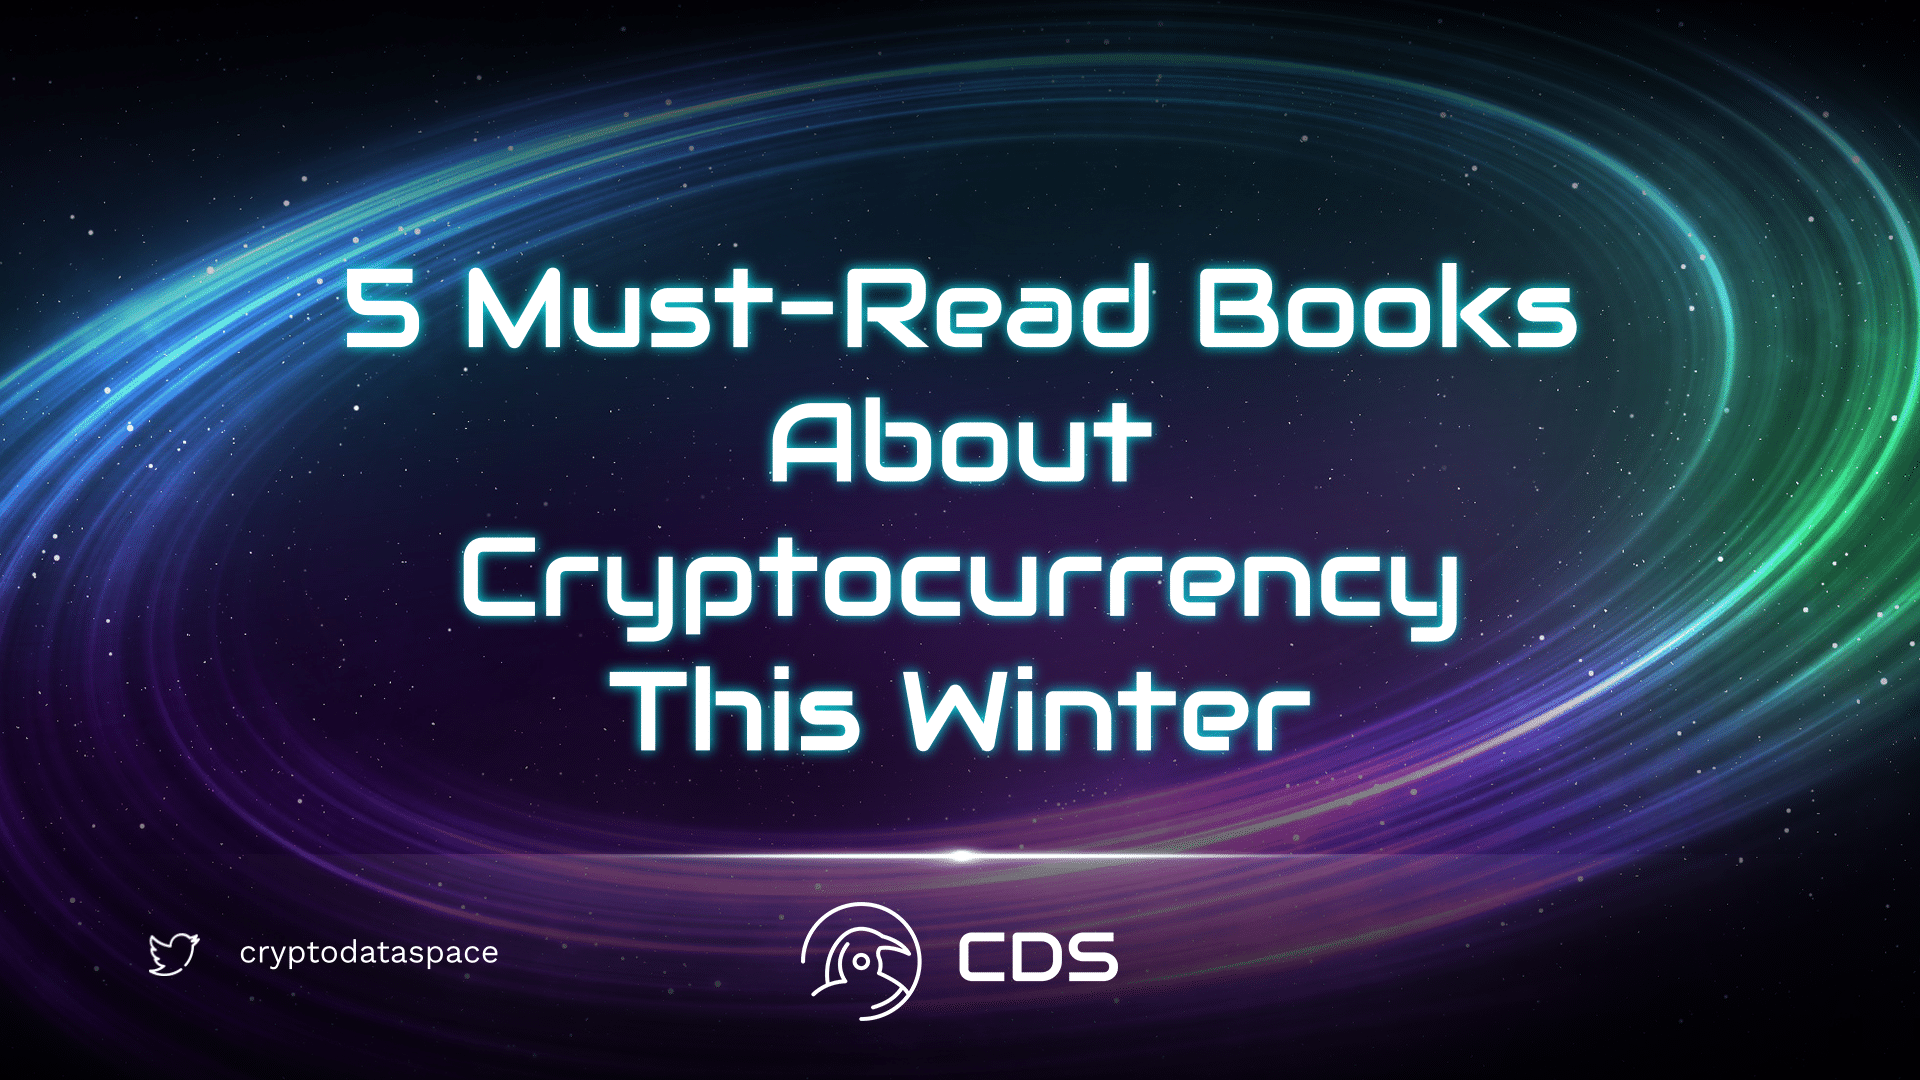 5 Must-Read Books About Cryptocurrency This Winter